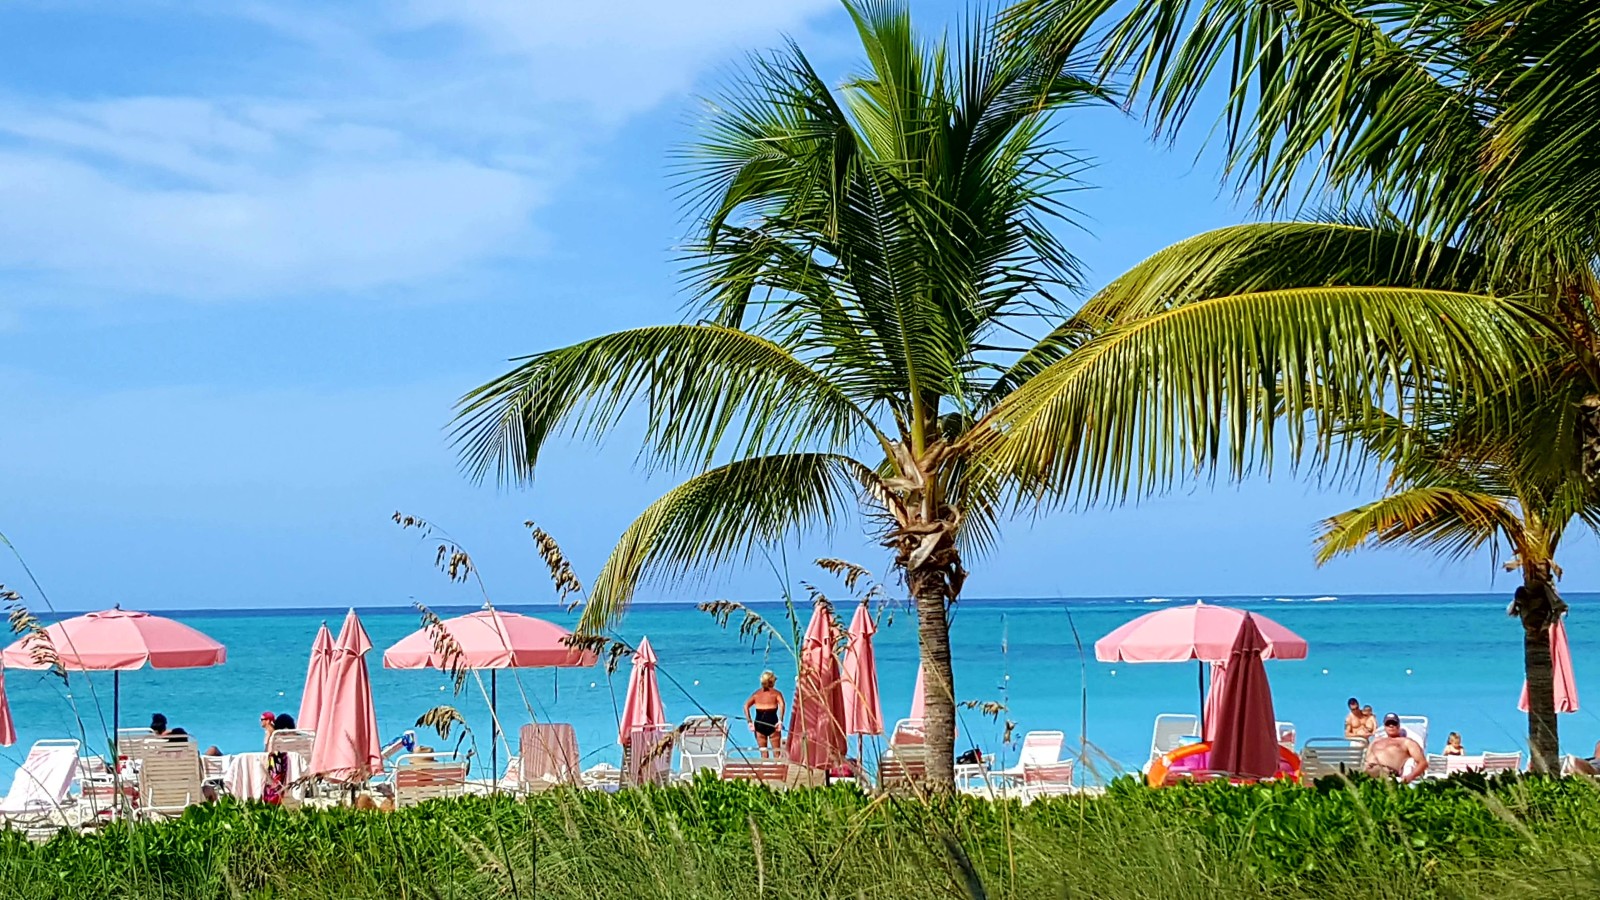 Relaxing & Adventurous Vacation in Turks and Caicos - Things to do